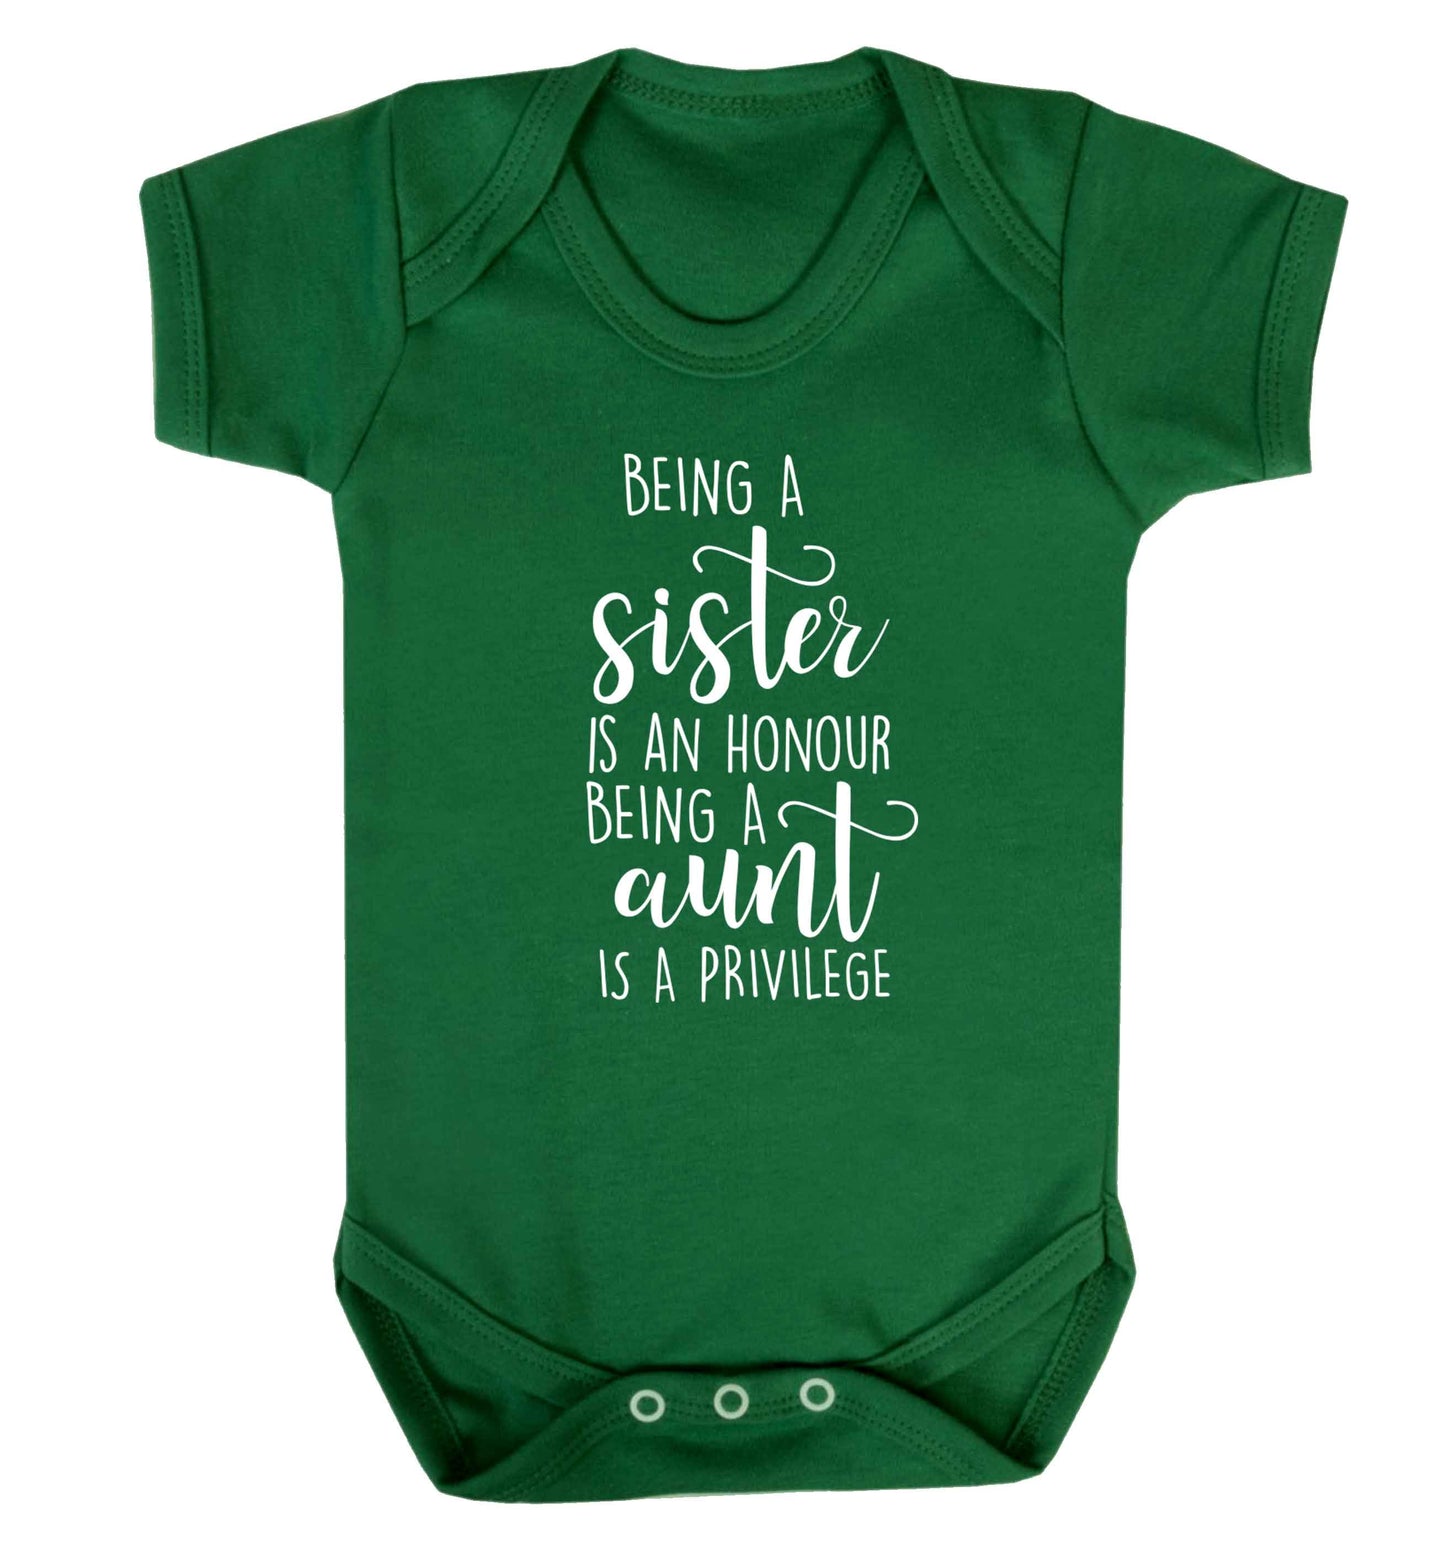 Being a sister is an honour being an auntie is a privilege Baby Vest green 18-24 months